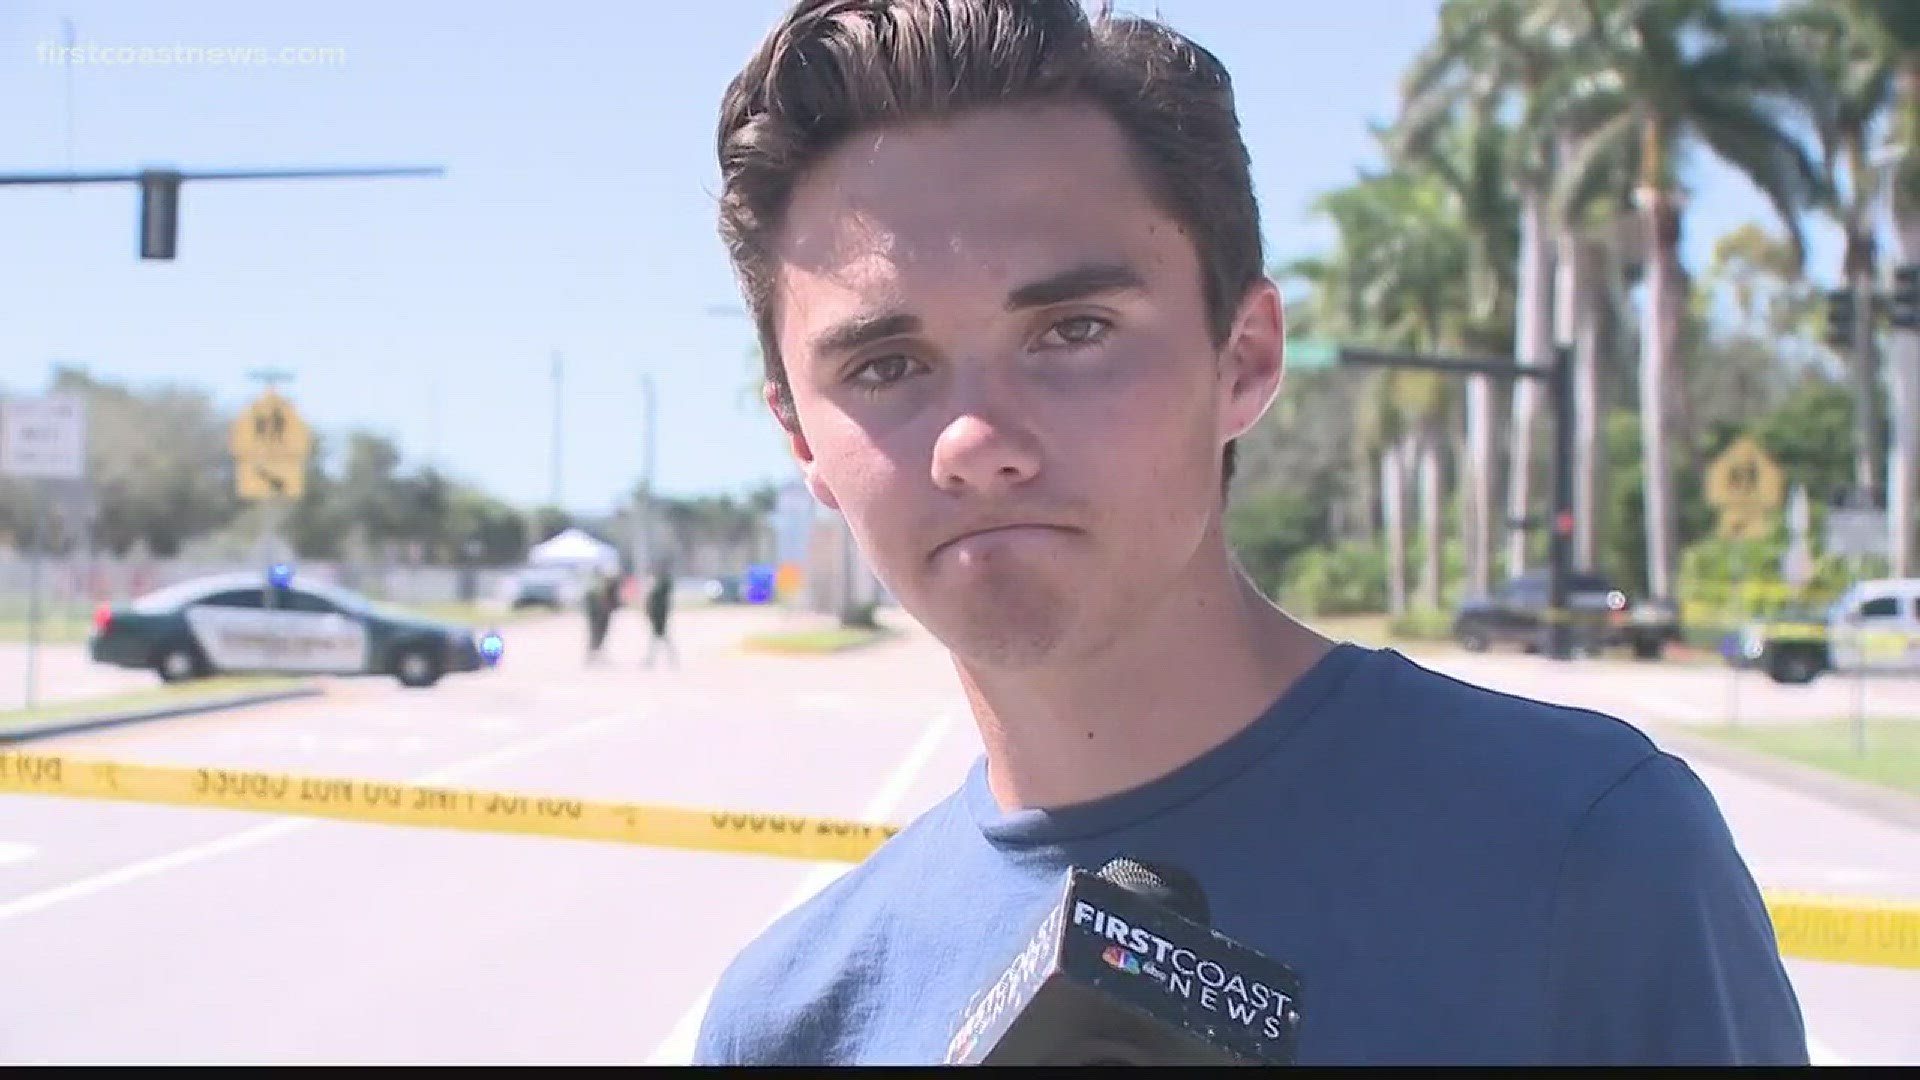 A Stoneman Douglas student is defending himself after being called a crisis actor.